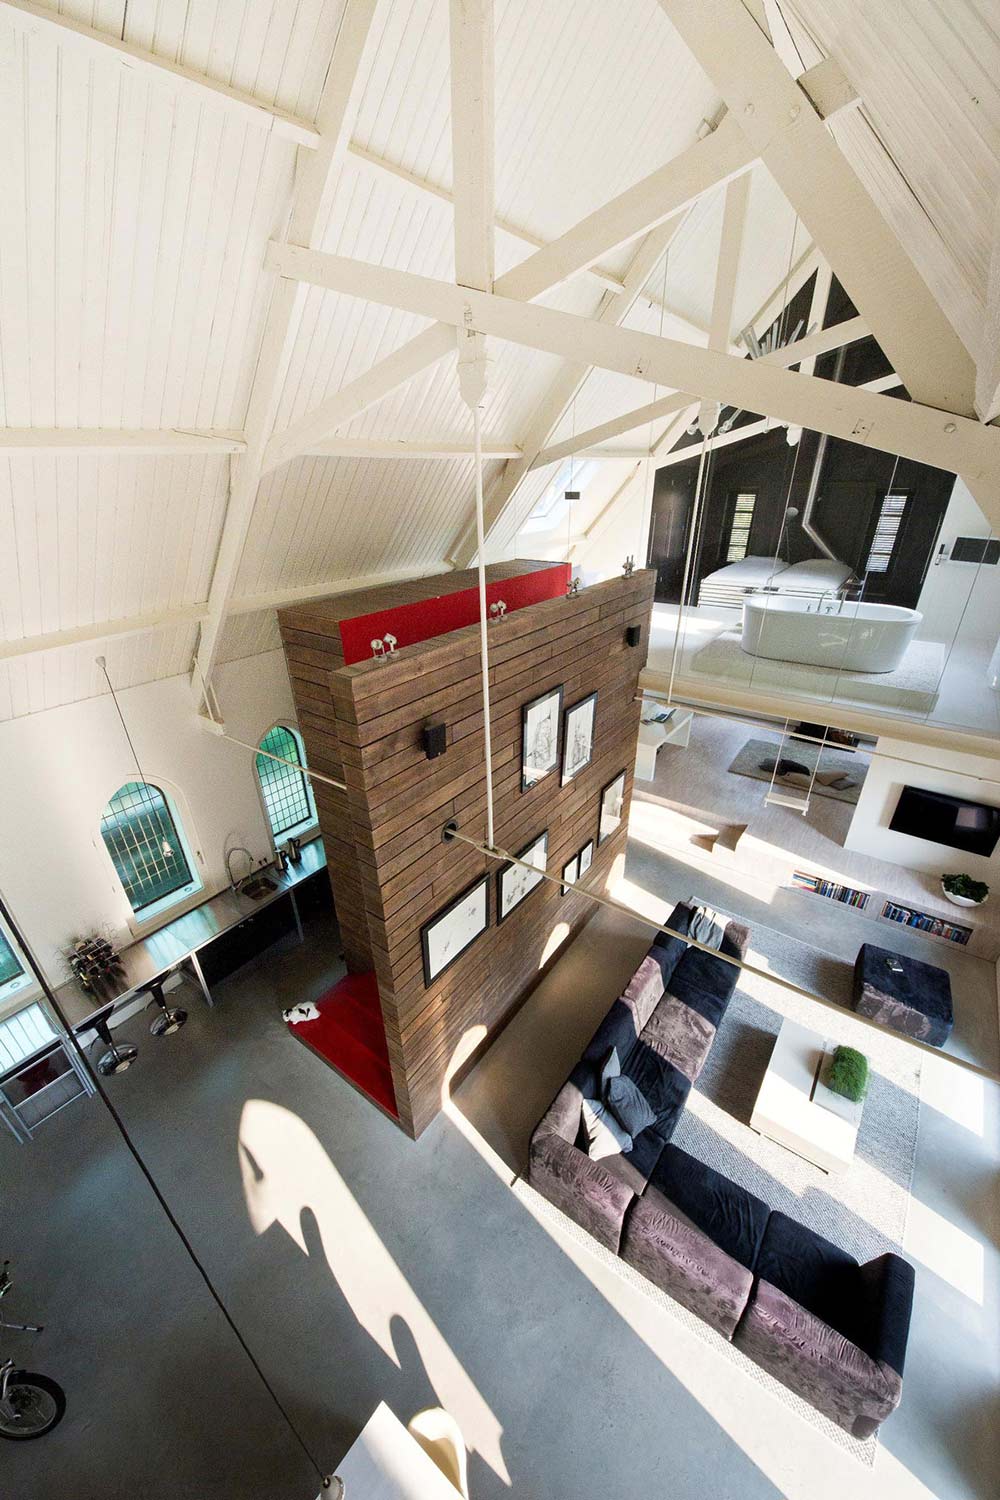 Open Plan, Vaulted Ceilings, Unique Loft Conversion in The Netherlands